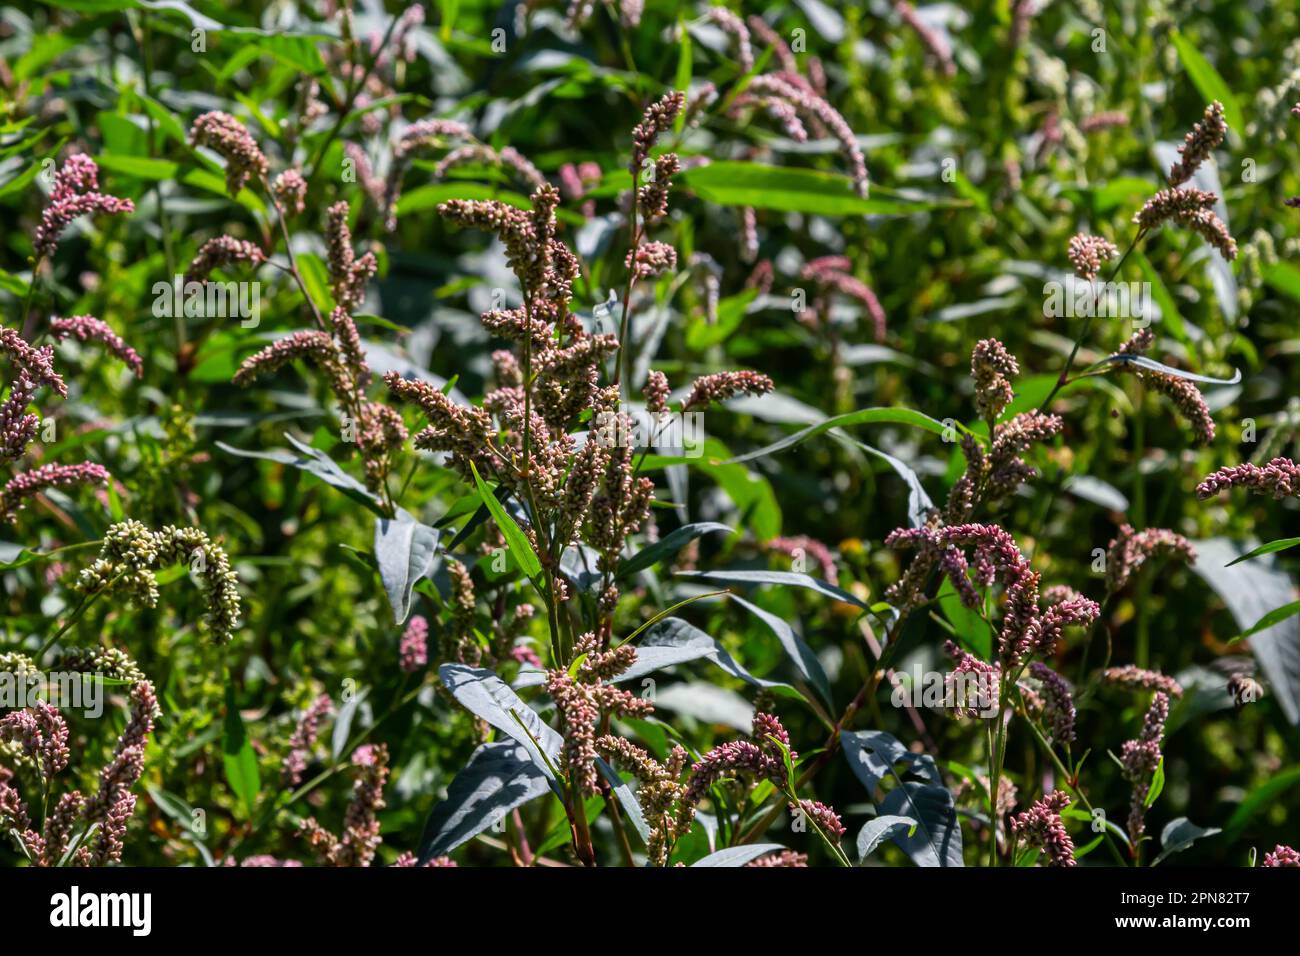 Colorful Persicaria longiseta, a species of flowering plant in the knotweed family. Stock Photo